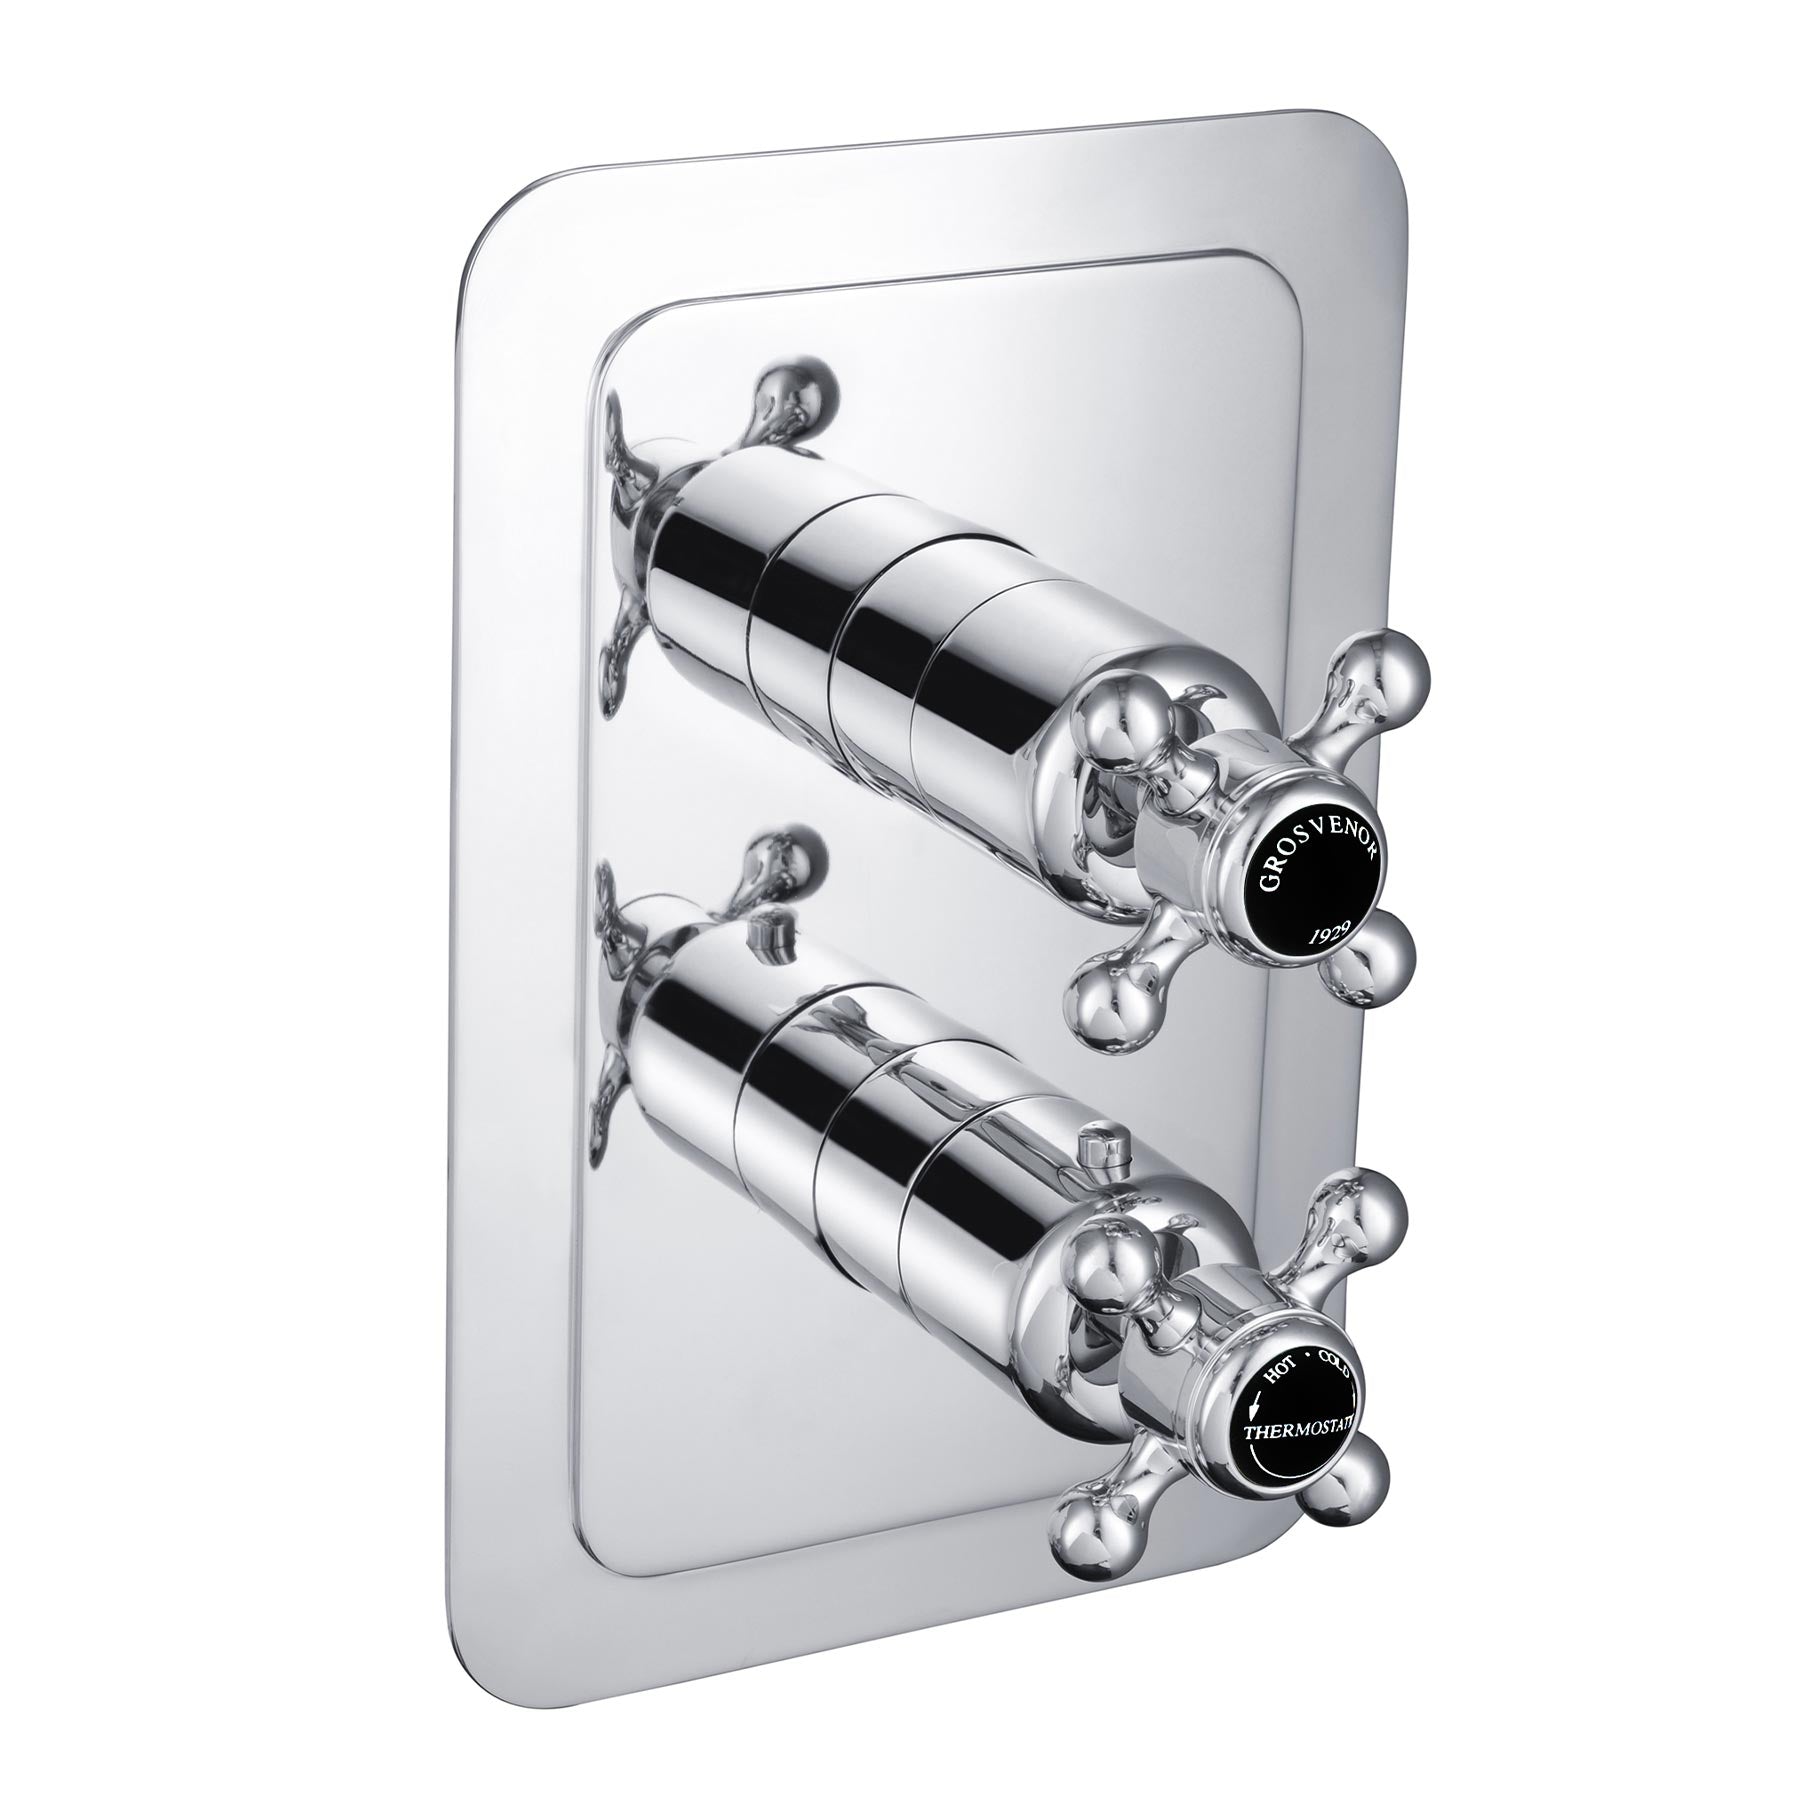 Chester Black Crosshead 1 Outlet Concealed Thermostatic Shower Valve - Vertical. 